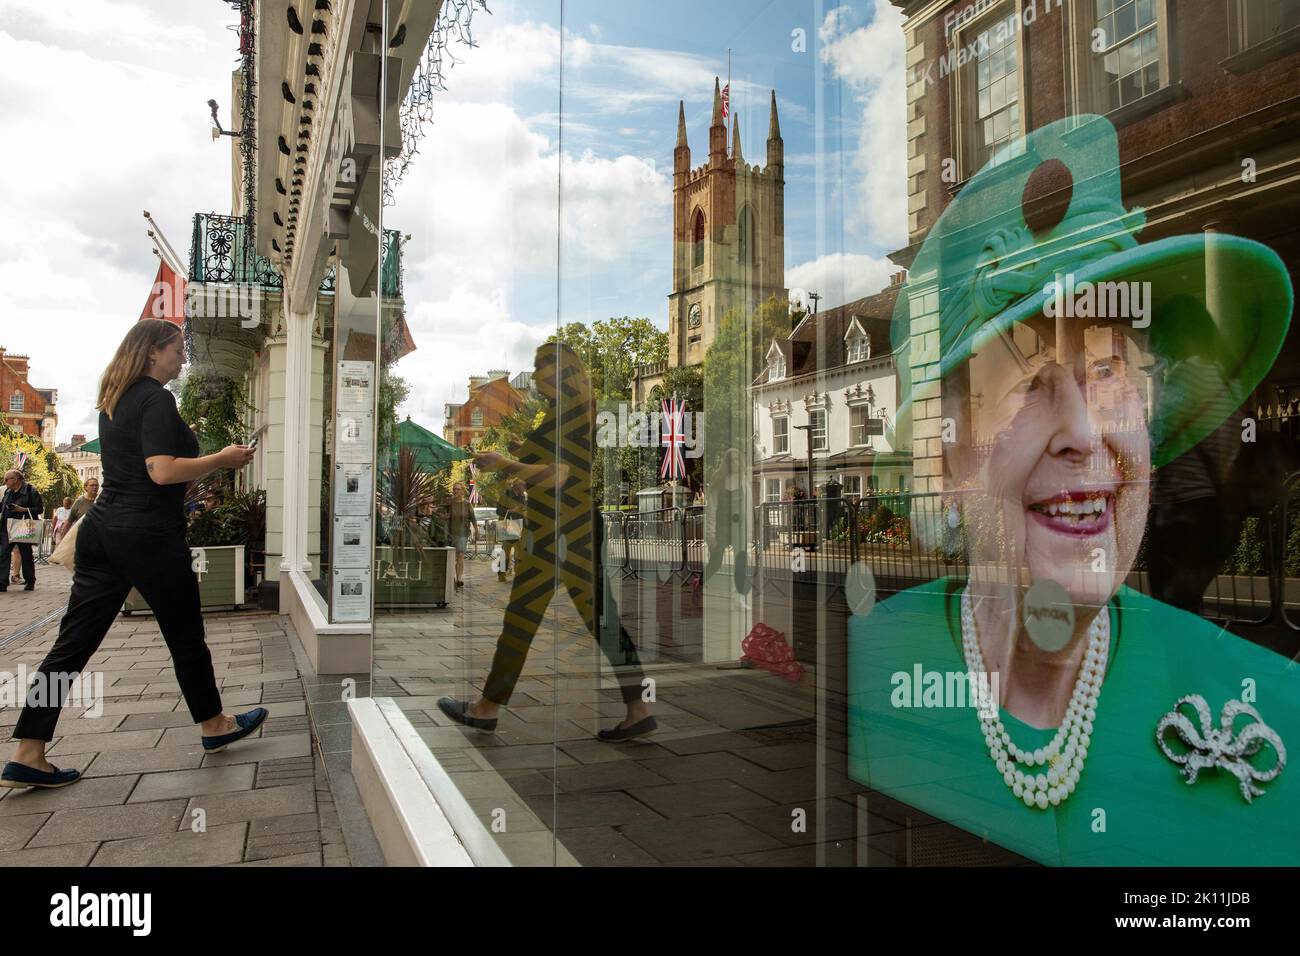 Windsor, UK. 14th September, 2022. Members of the public pass a tribute to Queen Elizabeth II displayed in a shop window. Queen Elizabeth II, the UK's longest-serving monarch, died at Balmoral aged 96 on 8th September after a reign lasting 70 years and will be buried in the King George VI memorial chapel in Windsor following a state funeral in Westminster Abbey on 19th September. Credit: Mark Kerrison/Alamy Live News Stock Photo